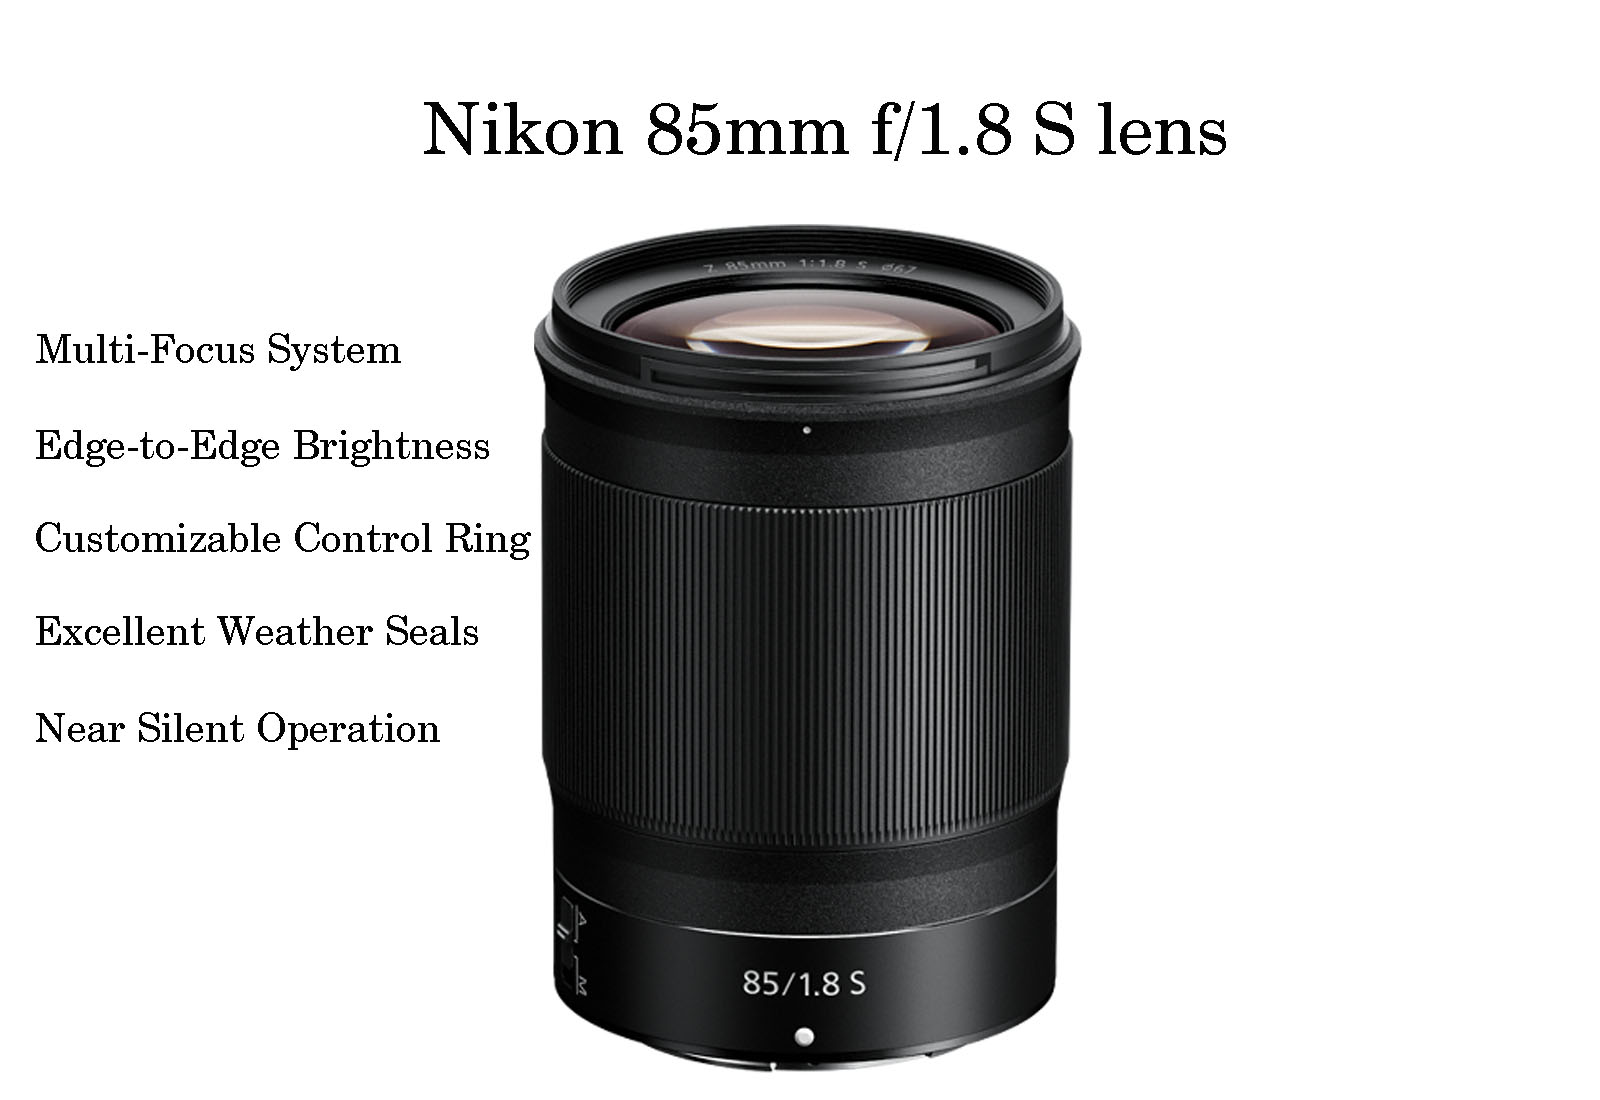 The Best Nikon 85mm 1.8 Lens you can buy for you Nikon Z